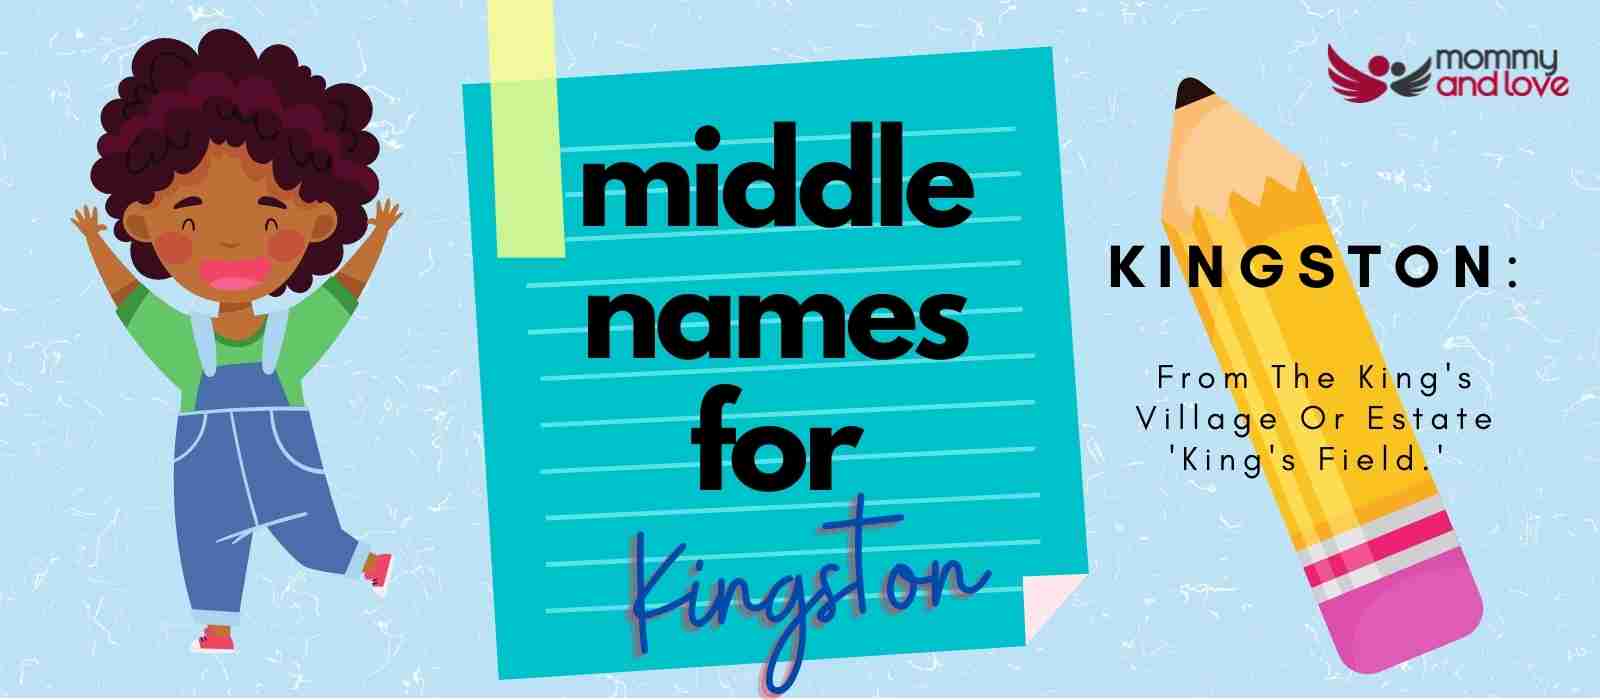 Middle Names for Kingston